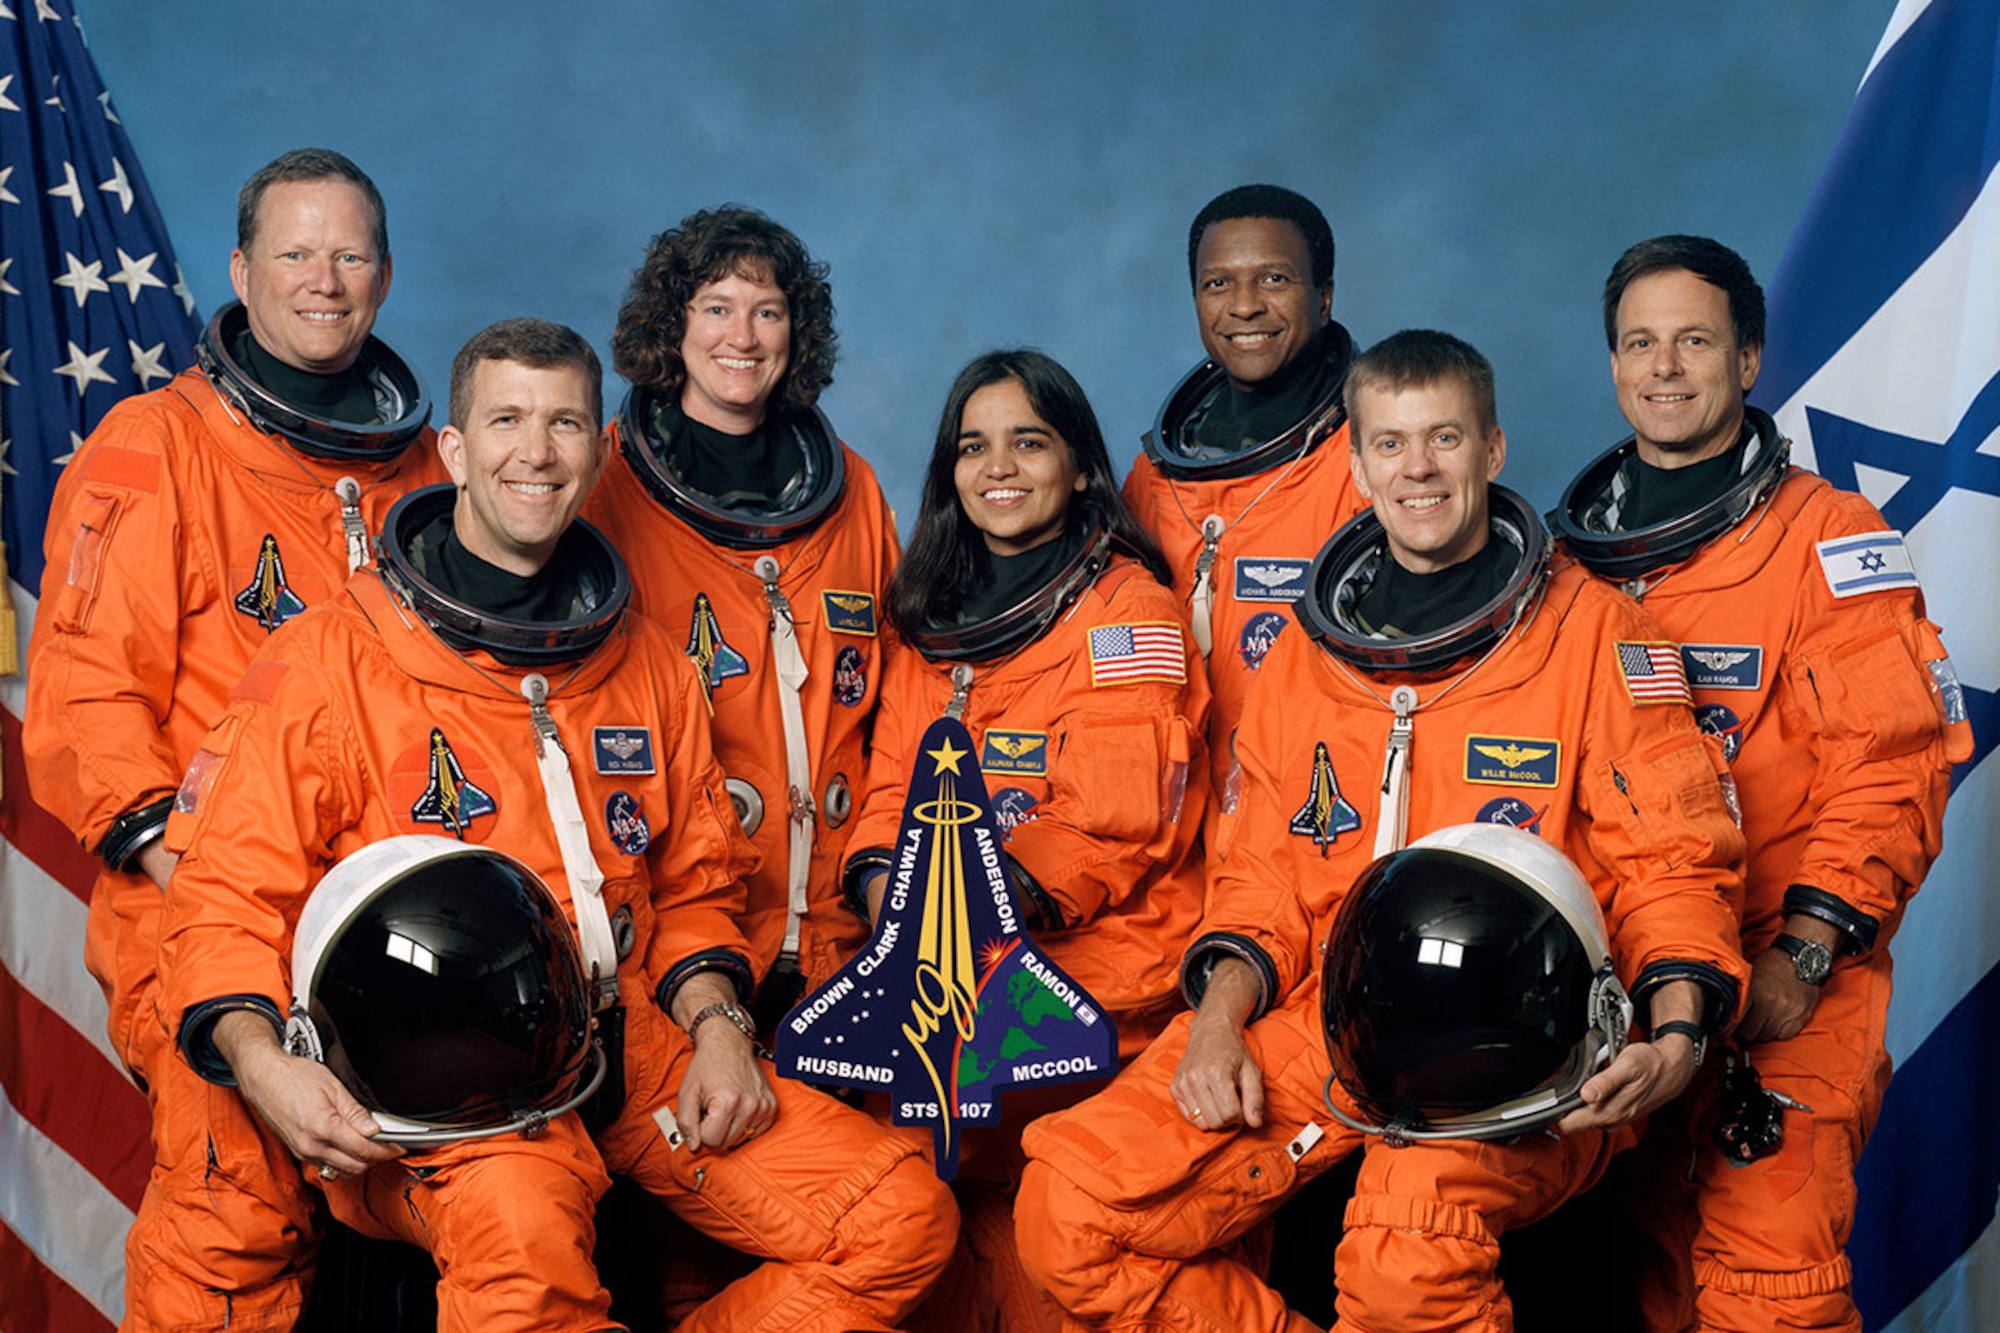 Space Shuttle Columbia, STS-107, Crew (l-r): Mission Specialist 1 David M. Brown, Commander Rick D. Husband, Mission Specialist 4 Laurel Blair Salton Clark, Mission Specialist 2 Kalpana Chawla, Payload Commander Michael P. Anderson, Pilot William C. McCool, Payload Specialist 1 Ilan Ramon. (Photo courtesy of NASA)